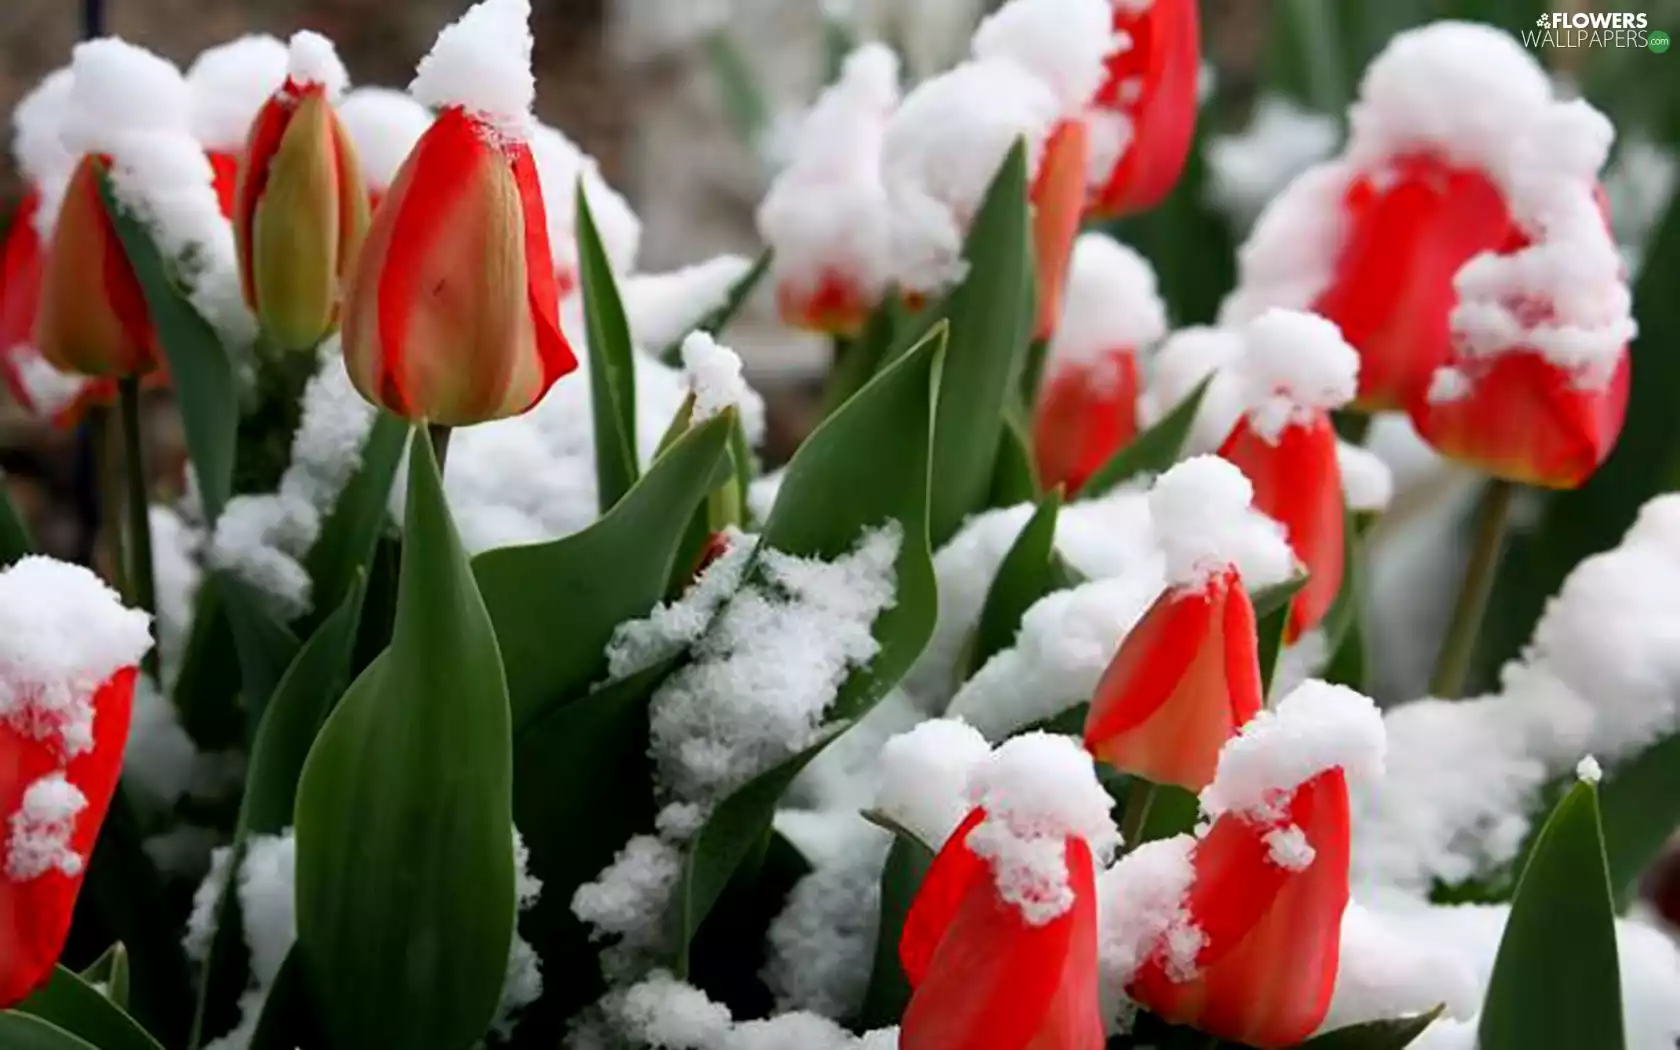 Red, Covered, snow, Tulips